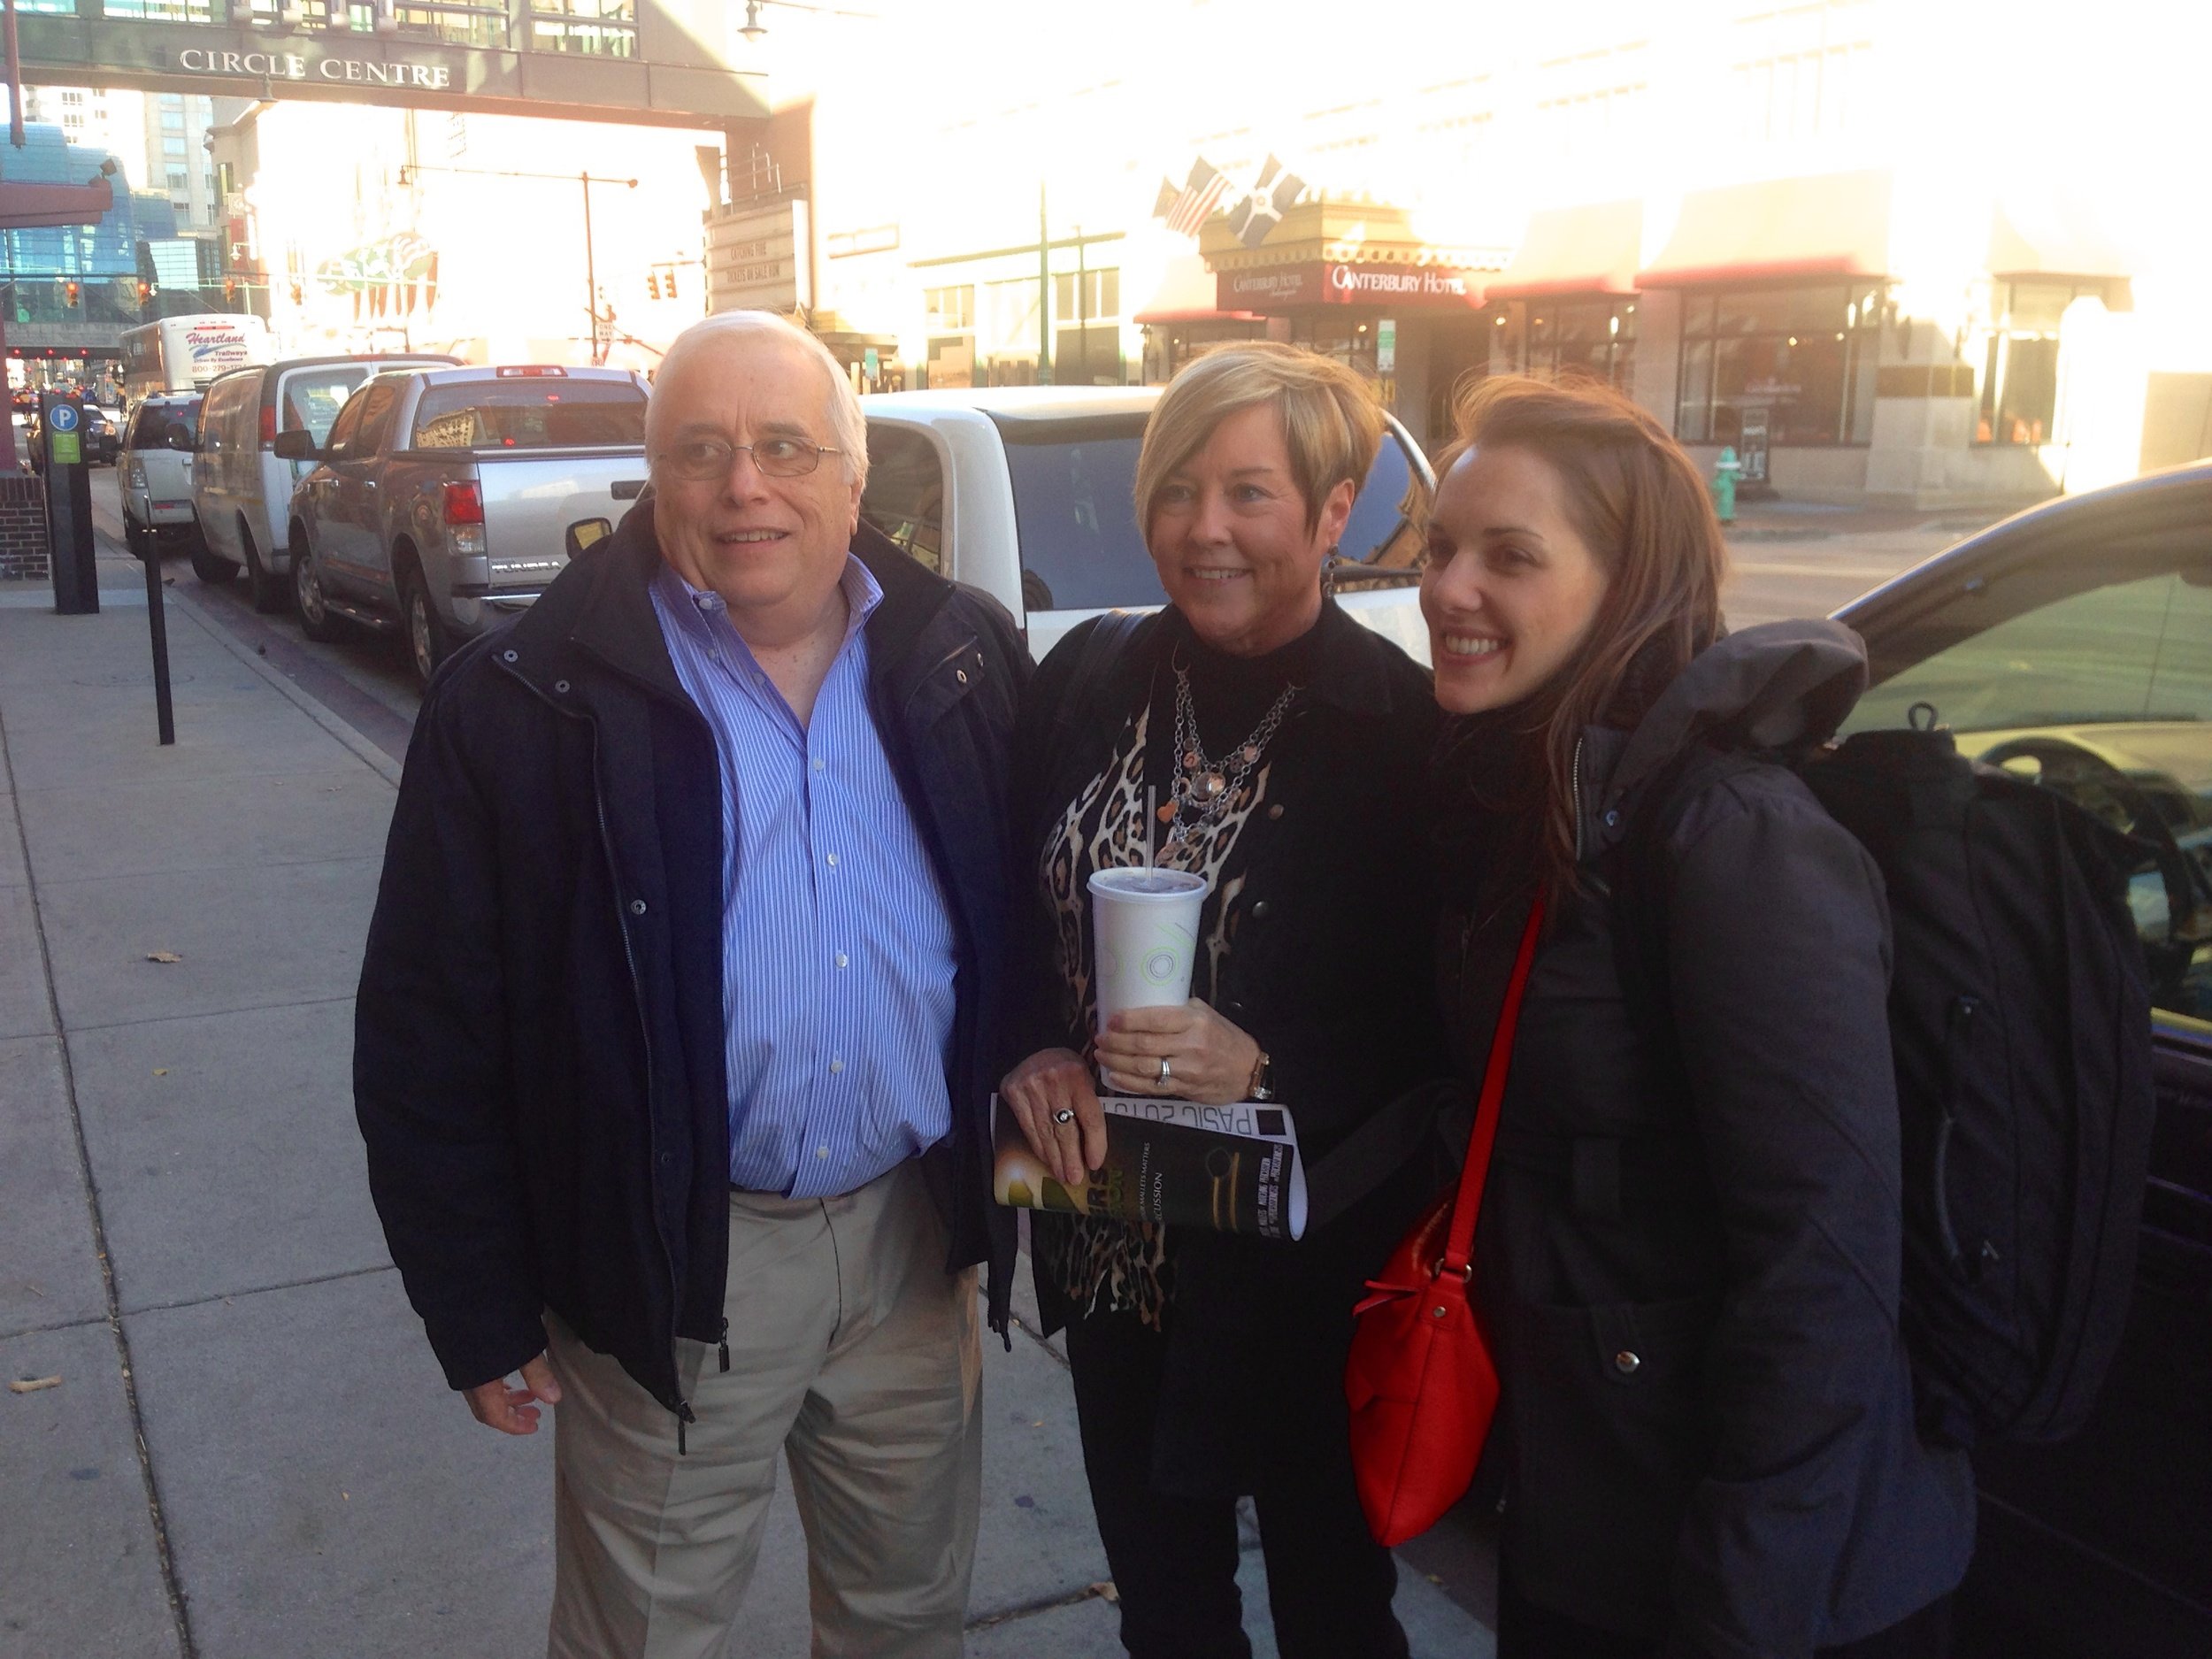 2013-11-14 14-48-21 Maria and parents.jpg